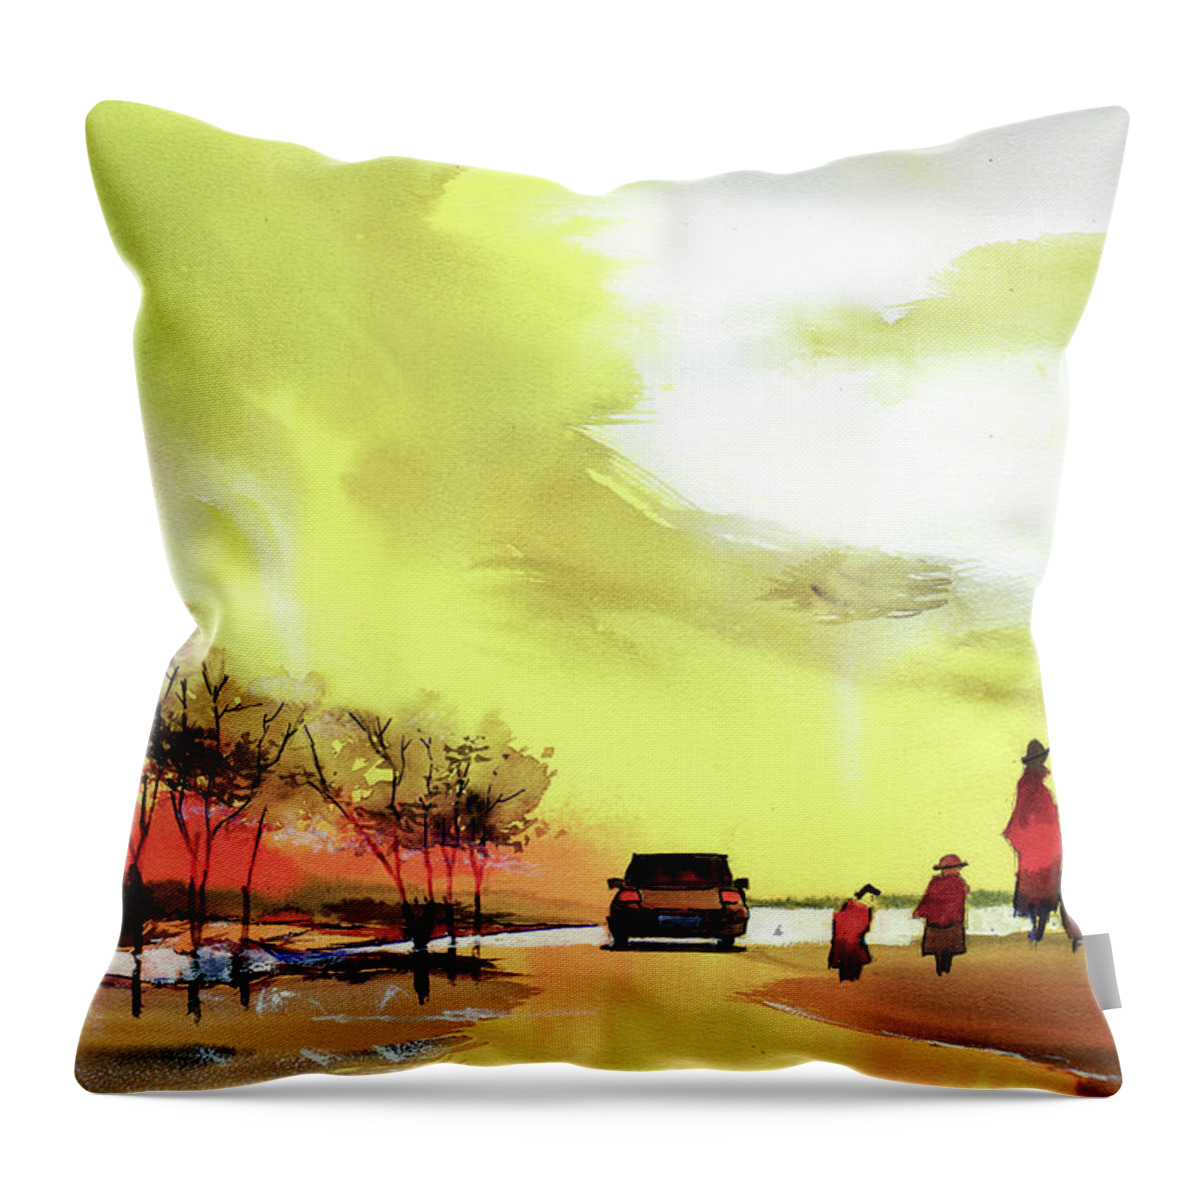 Nature Throw Pillow featuring the painting On Vacation by Anil Nene